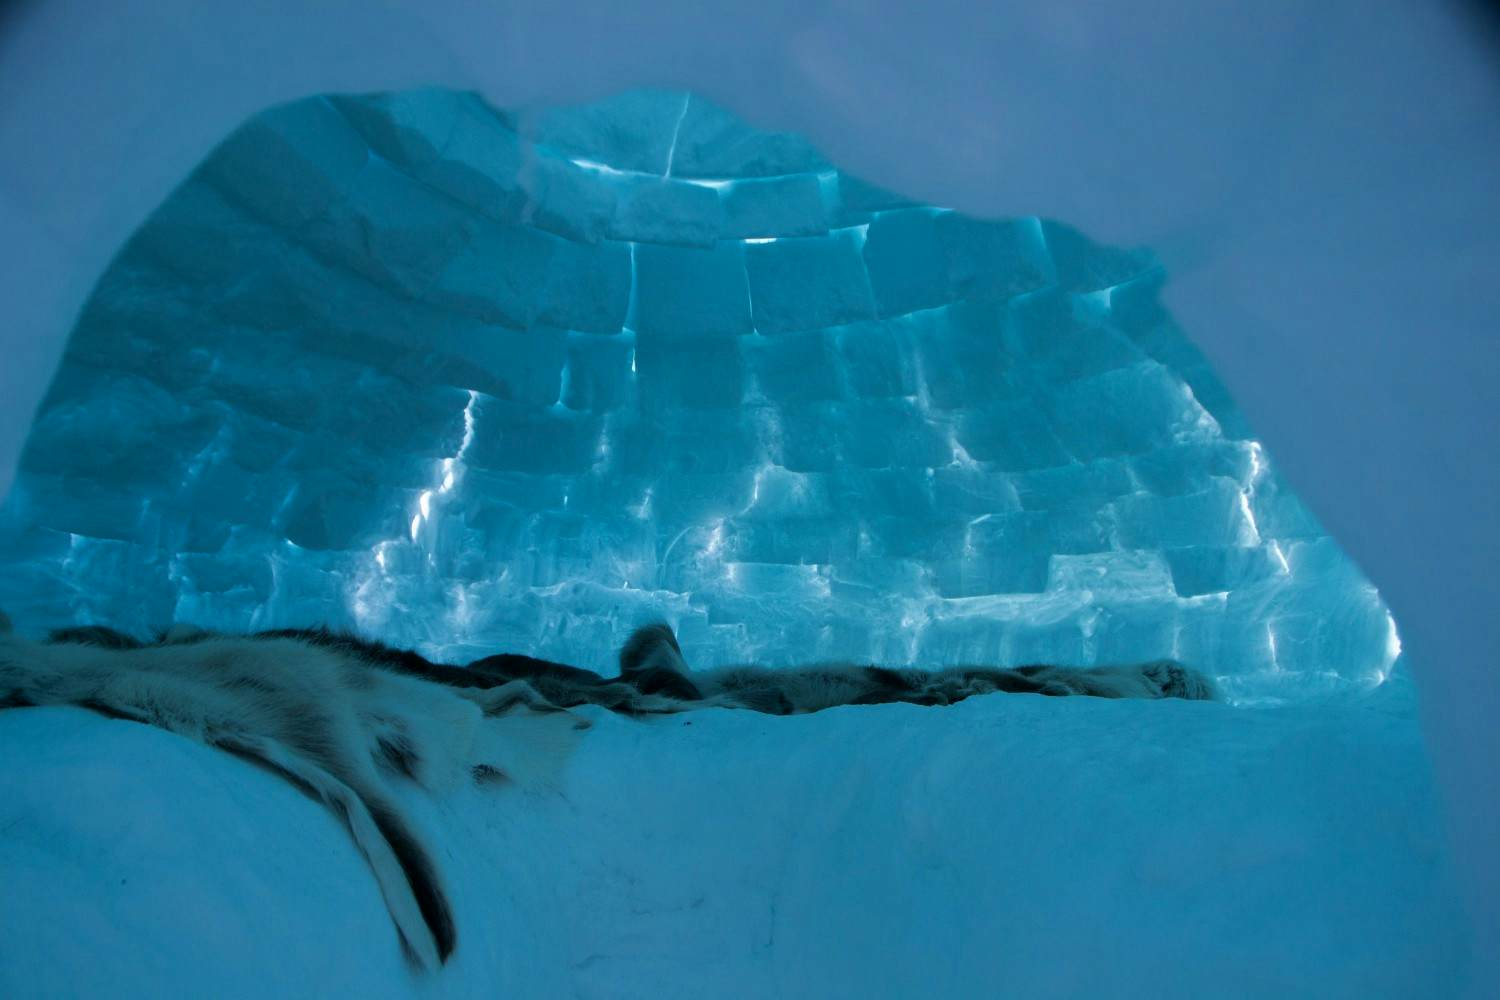 For one month, you can spend the night in an igloo at the North Pole -  Lonely Planet